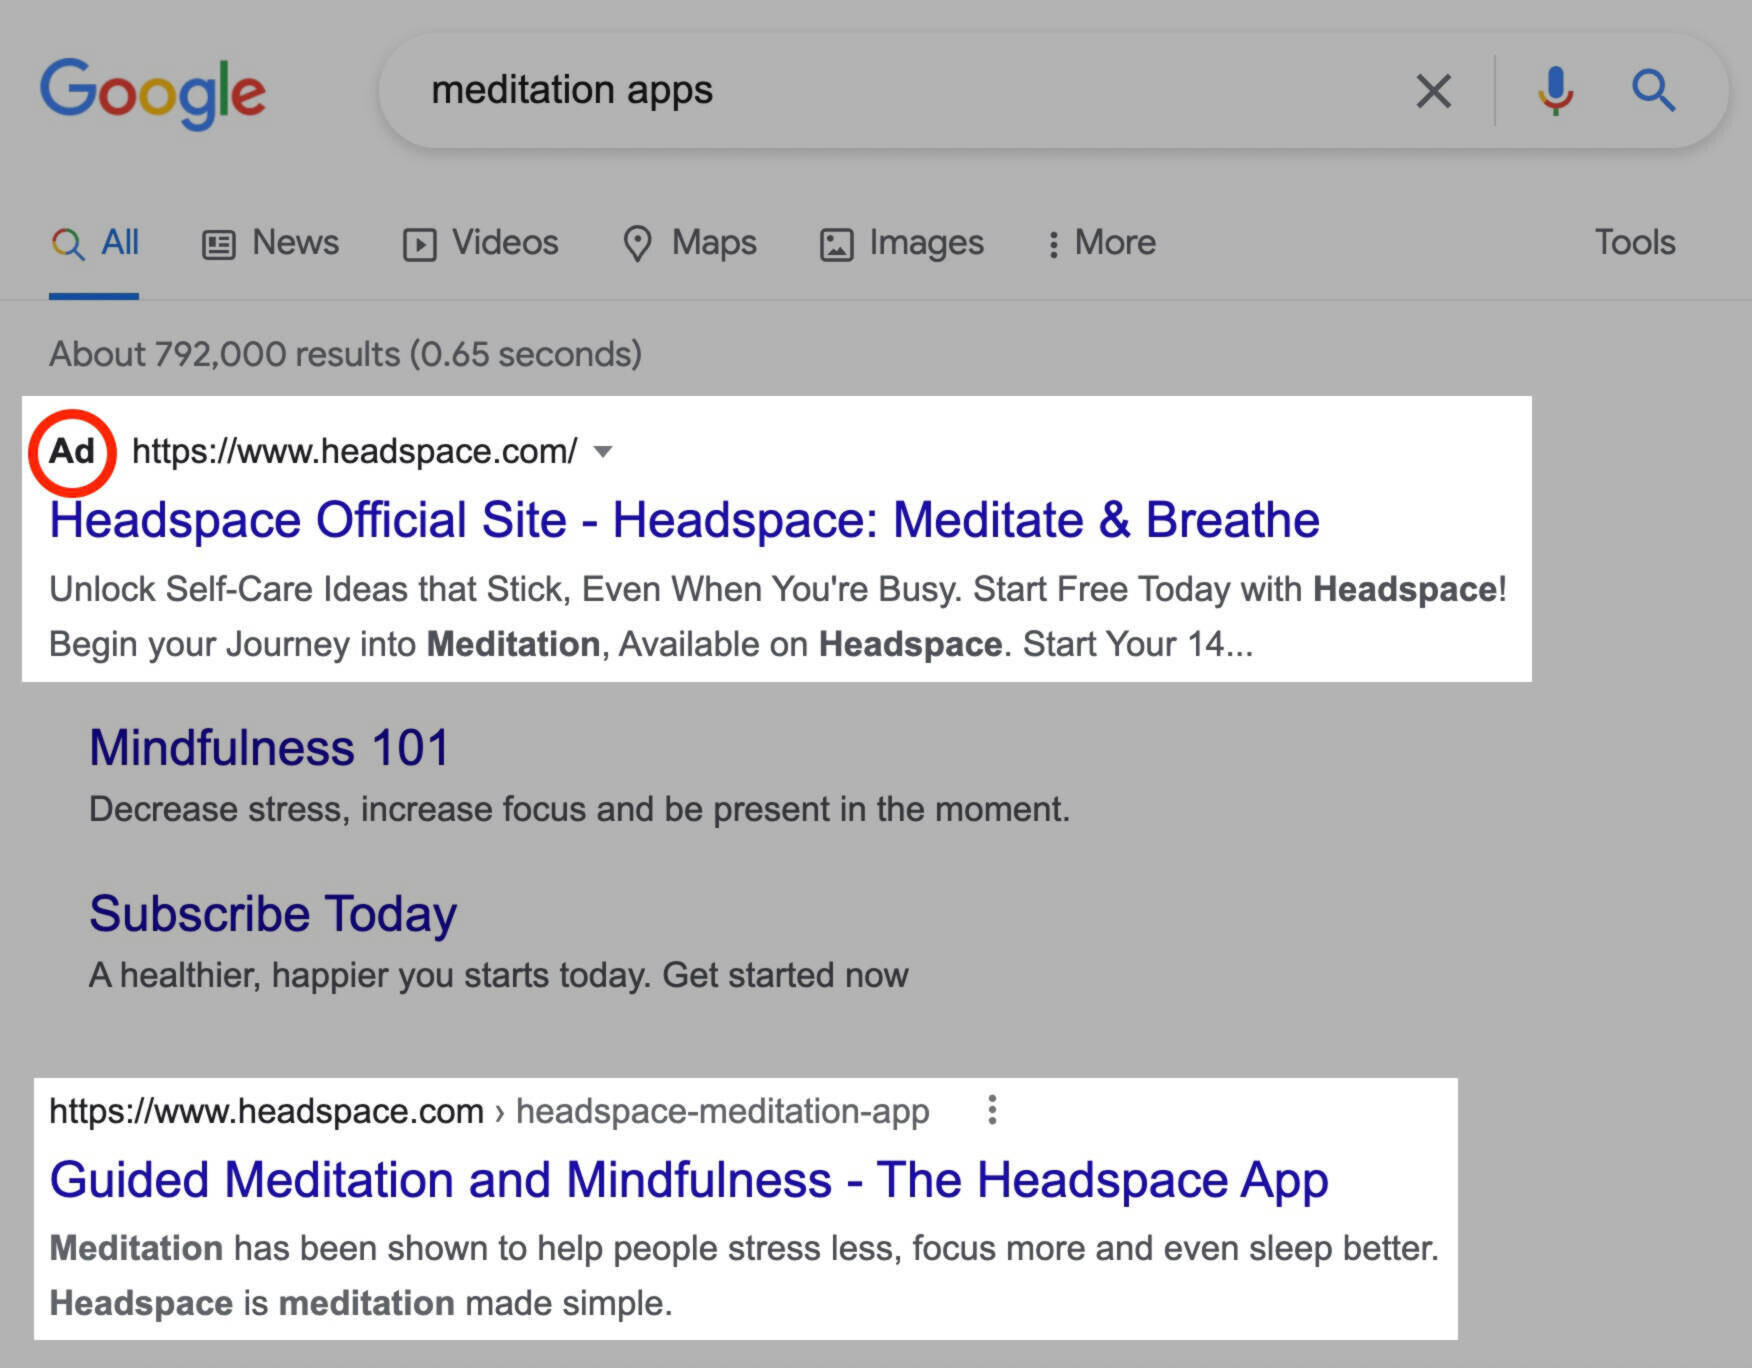 paid and organic results for "meditation apps"